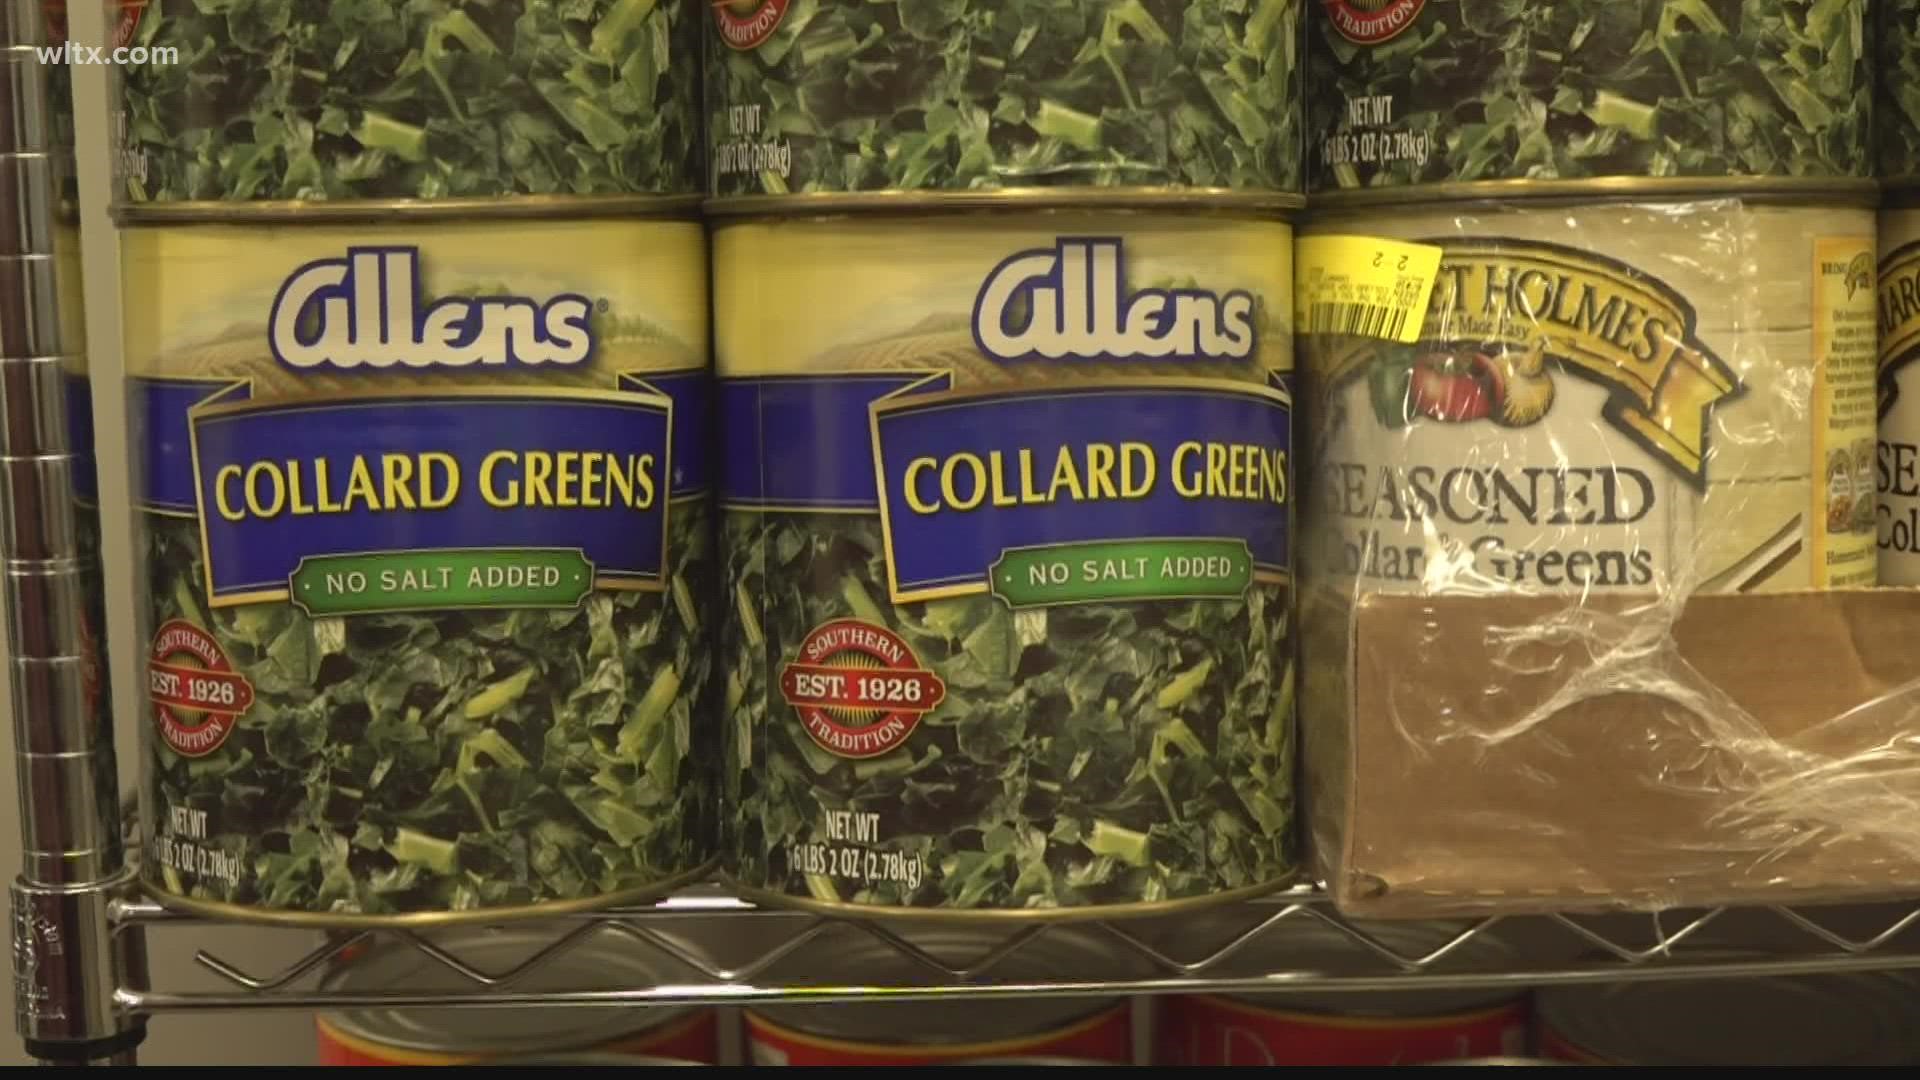 The Camden food bank spoke about the difficulties they are facing as the holiday seasons approach